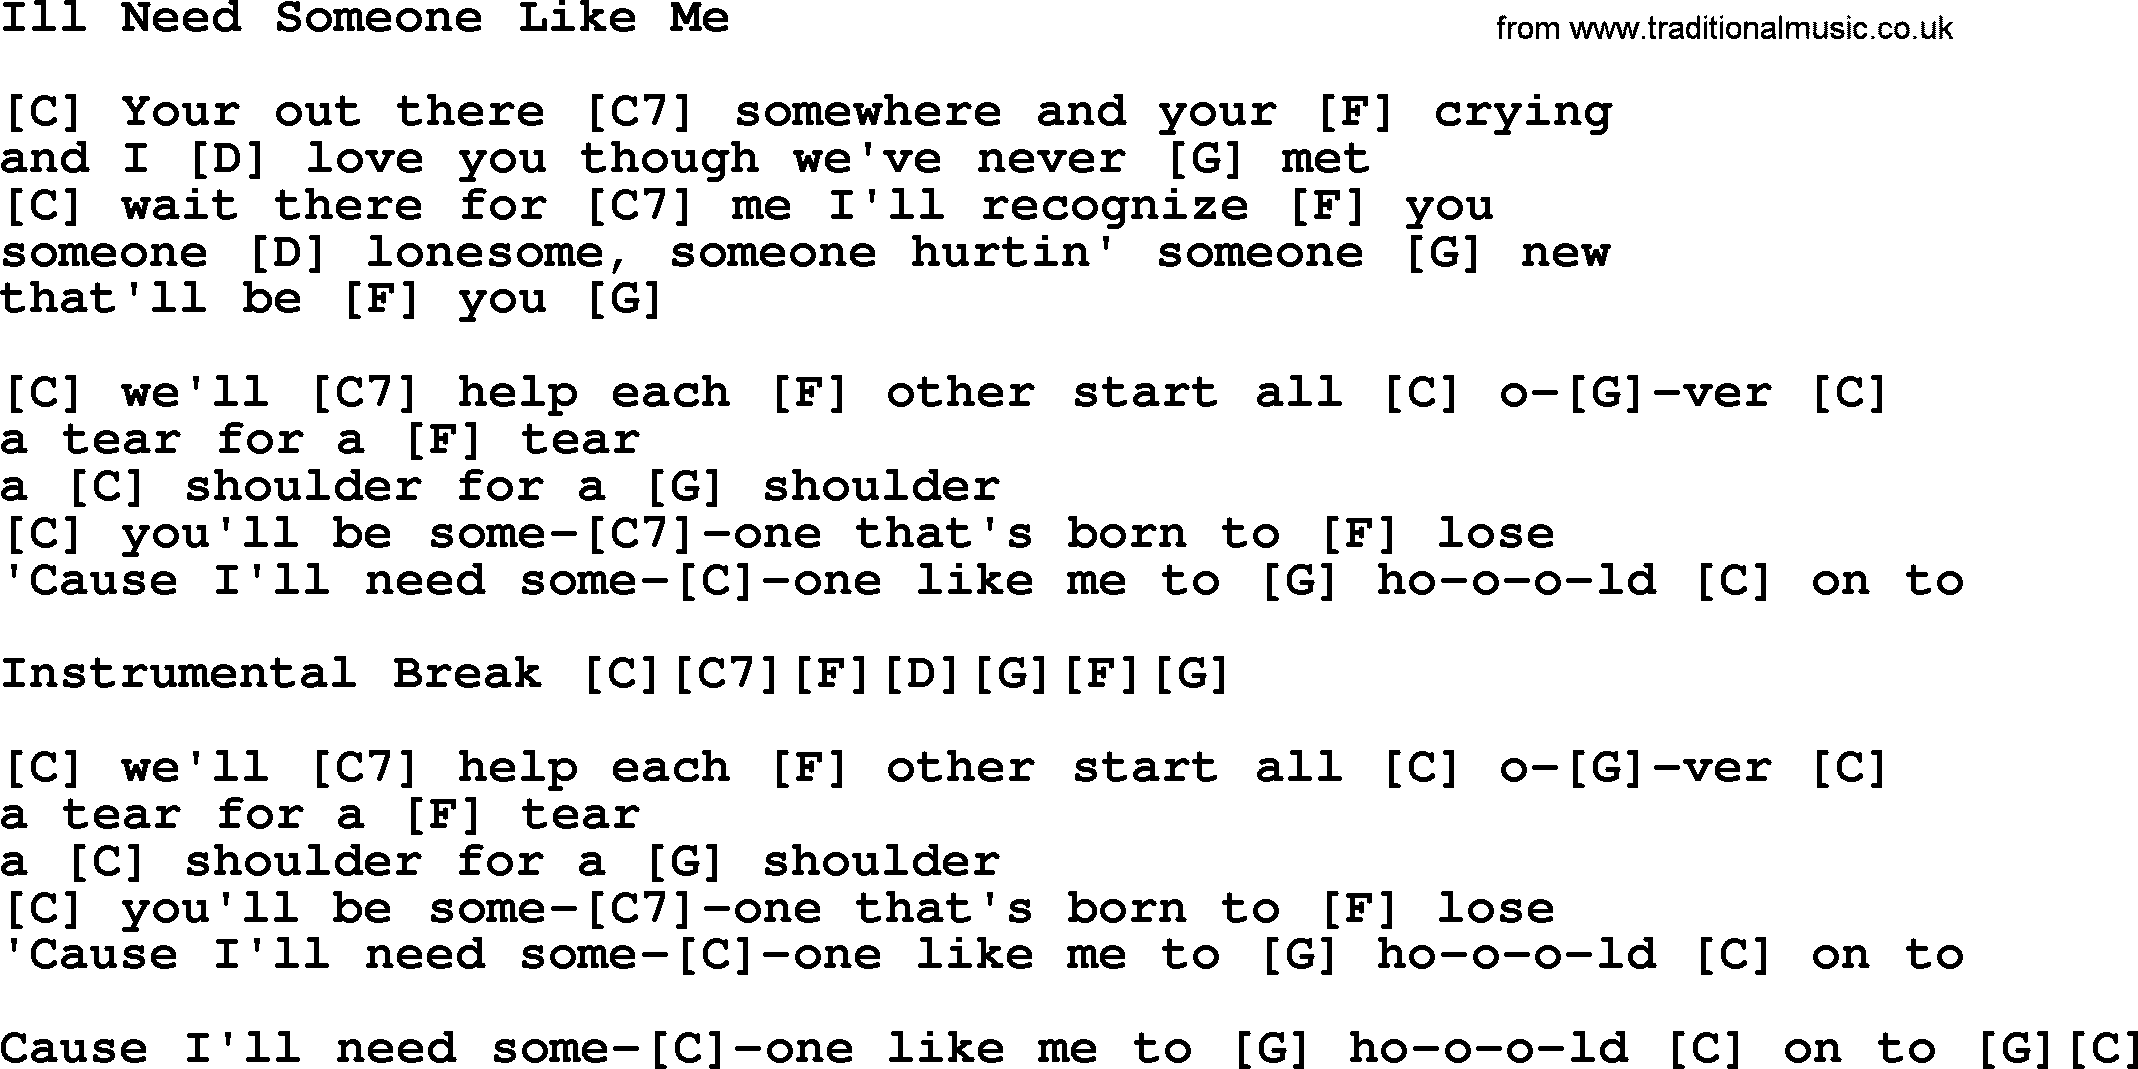 George Strait song: Ill Need Someone Like Me, lyrics and chords